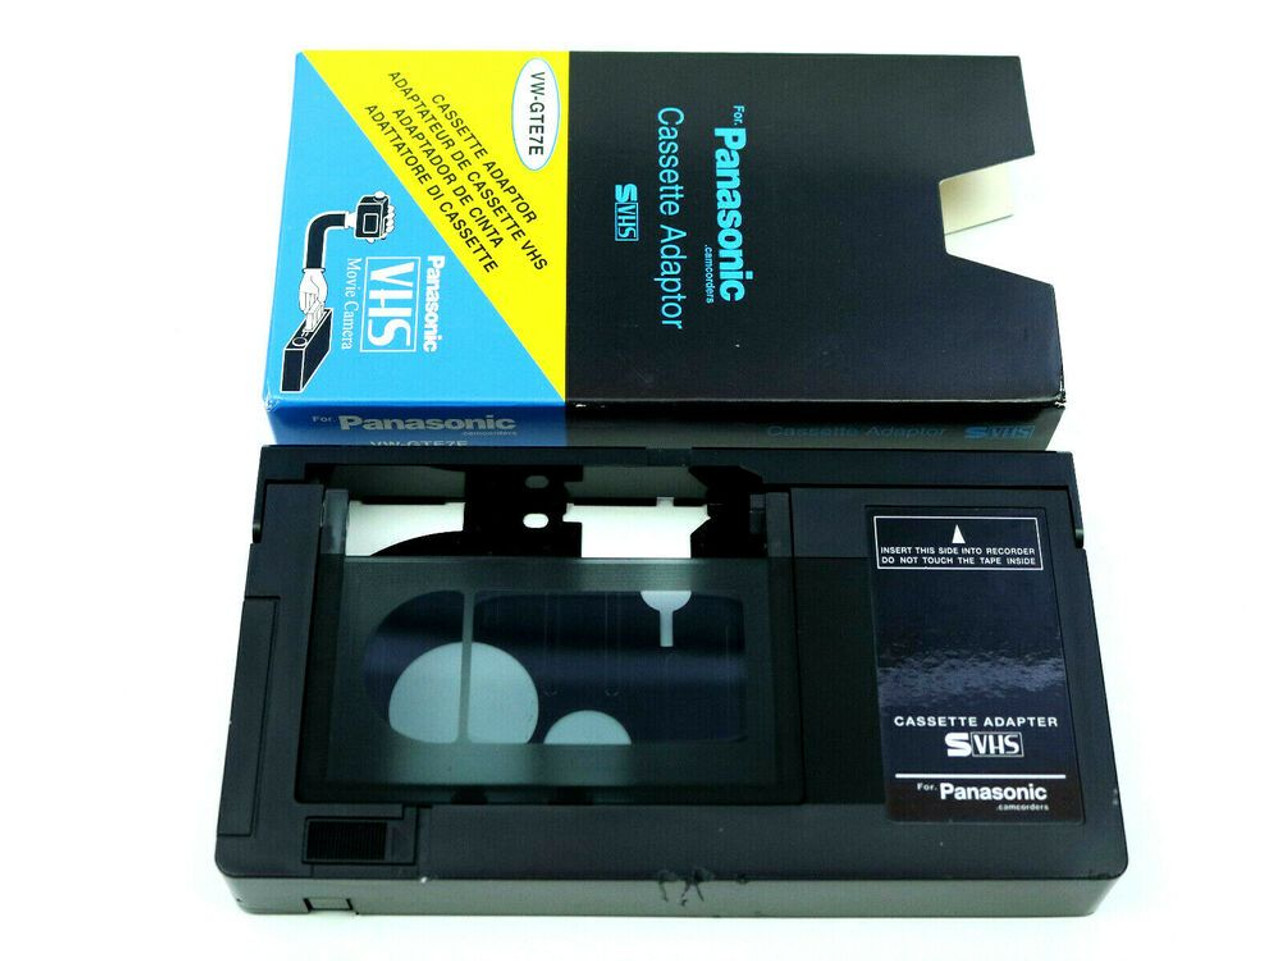  HQ VHS-C Video Cassette Adaptor - NOT COMPATIBLE WITH